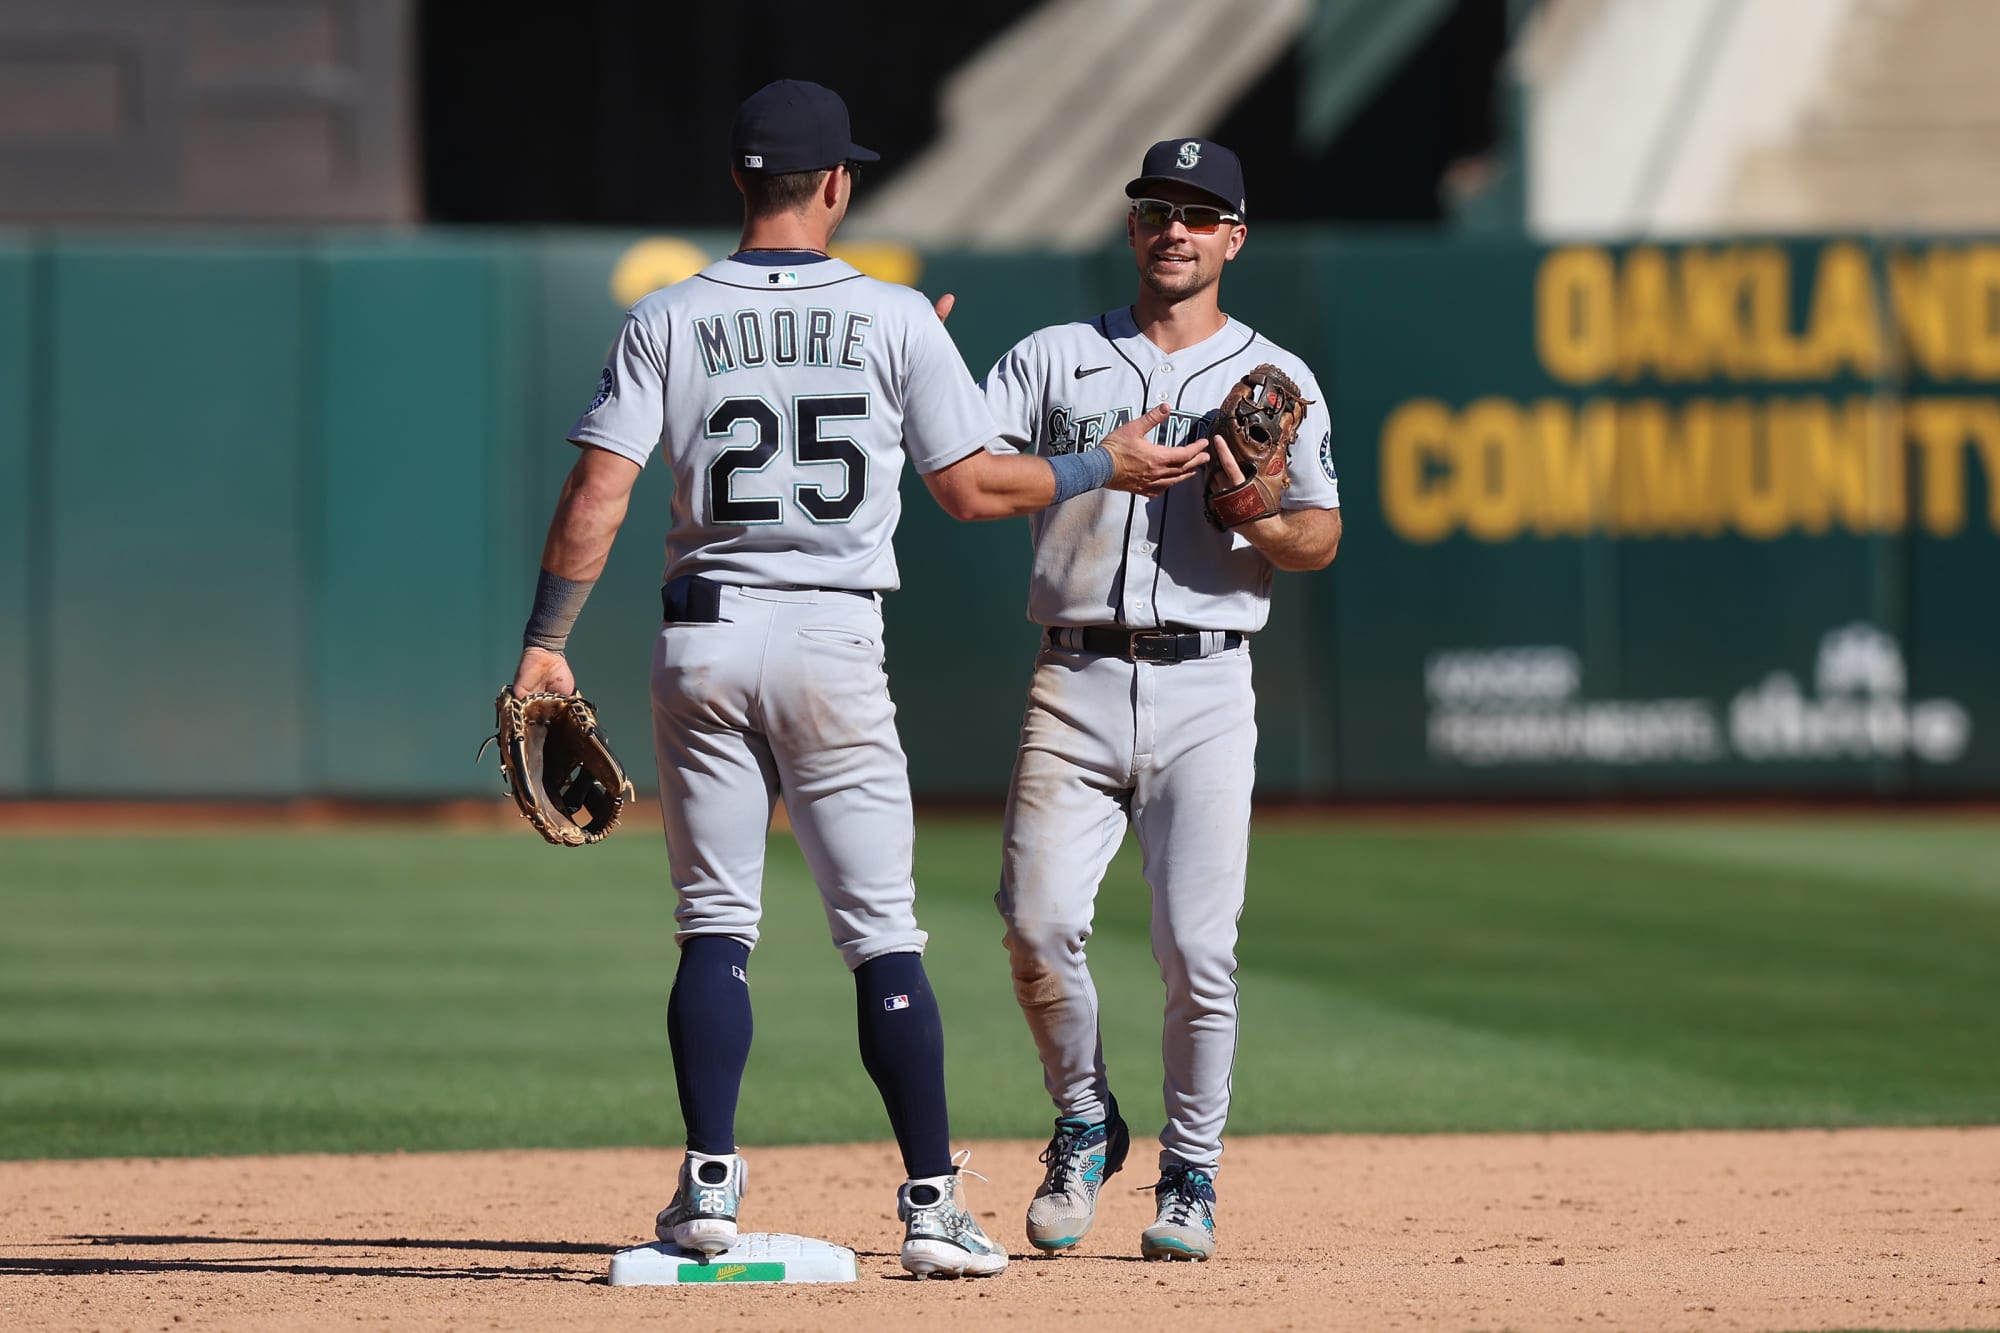 Mariners at Royals Series Preview: The Final 2022 Road Trip